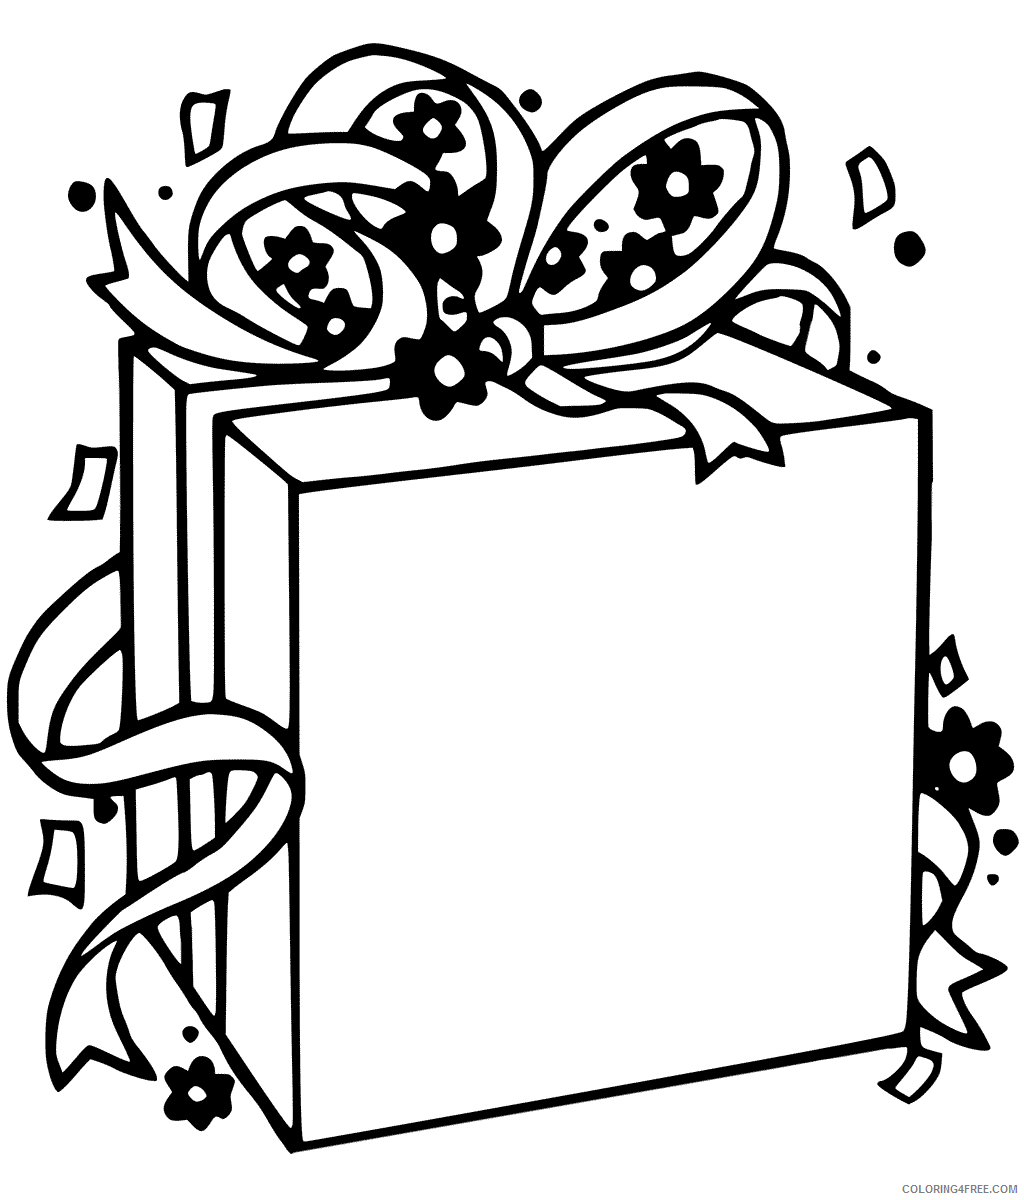 Christmas Coloring Pages Blank Christmas Present Printable 2020 006 Coloring4free